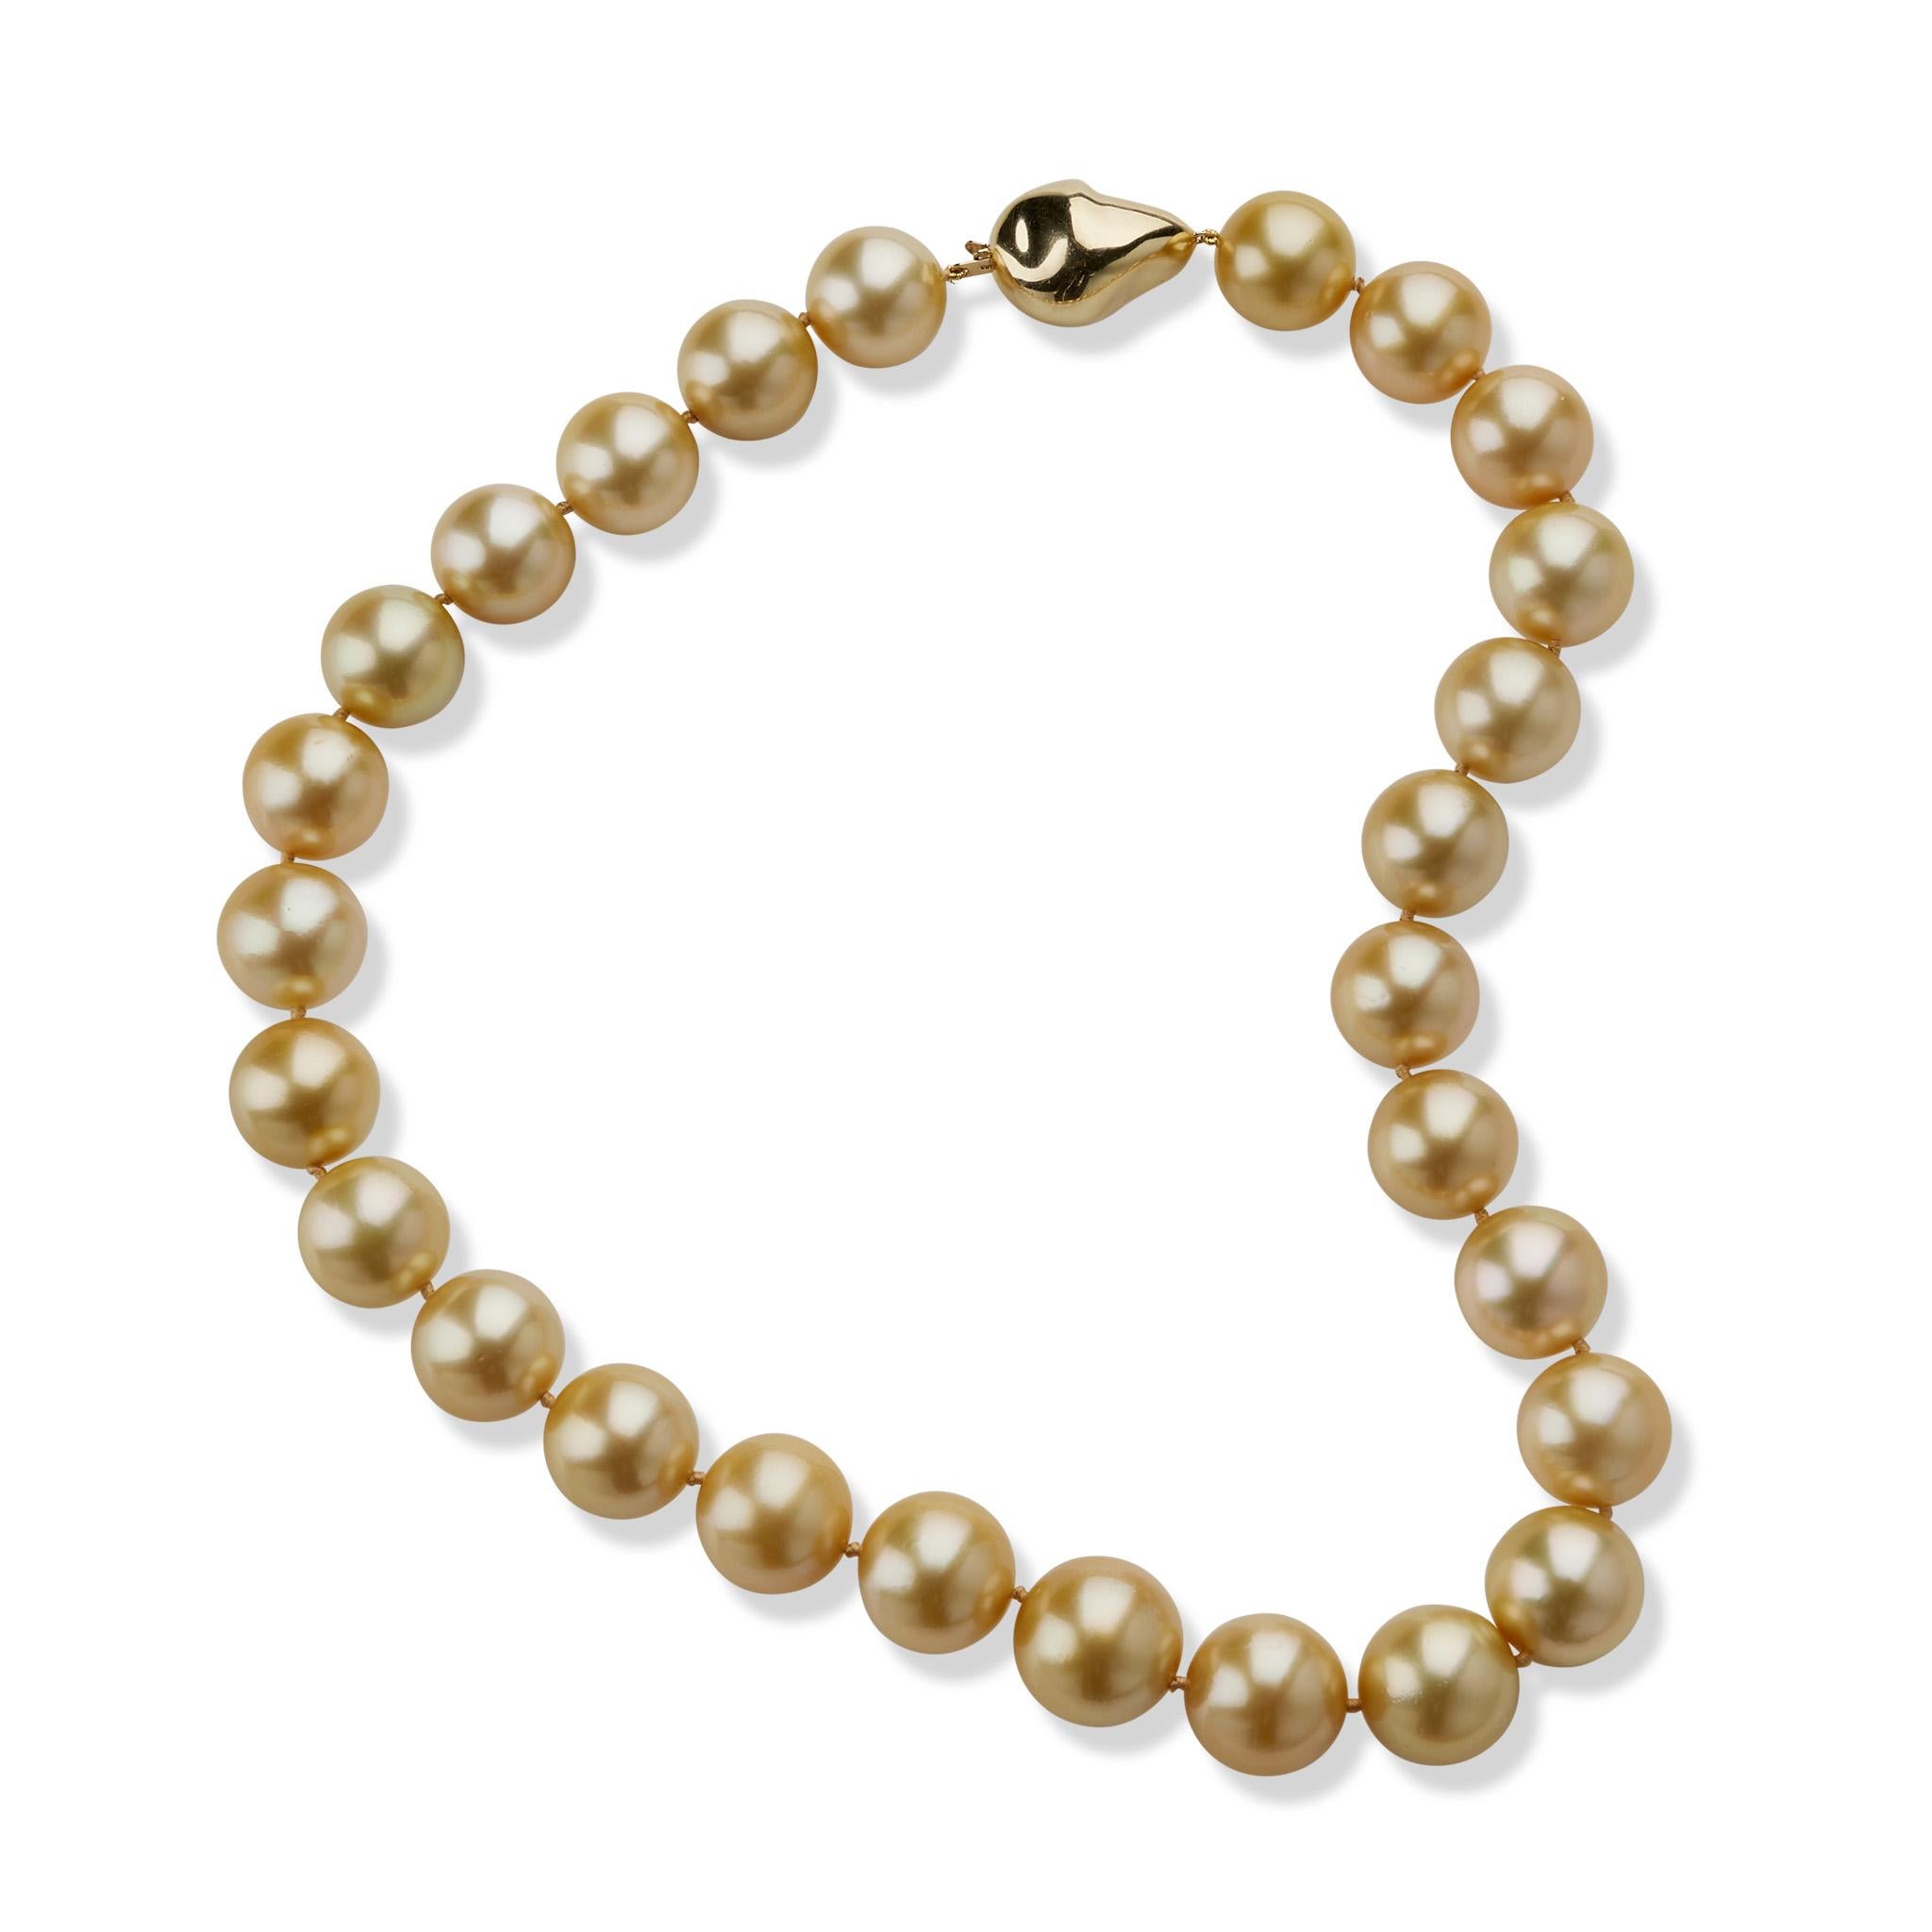 natural color of pearls